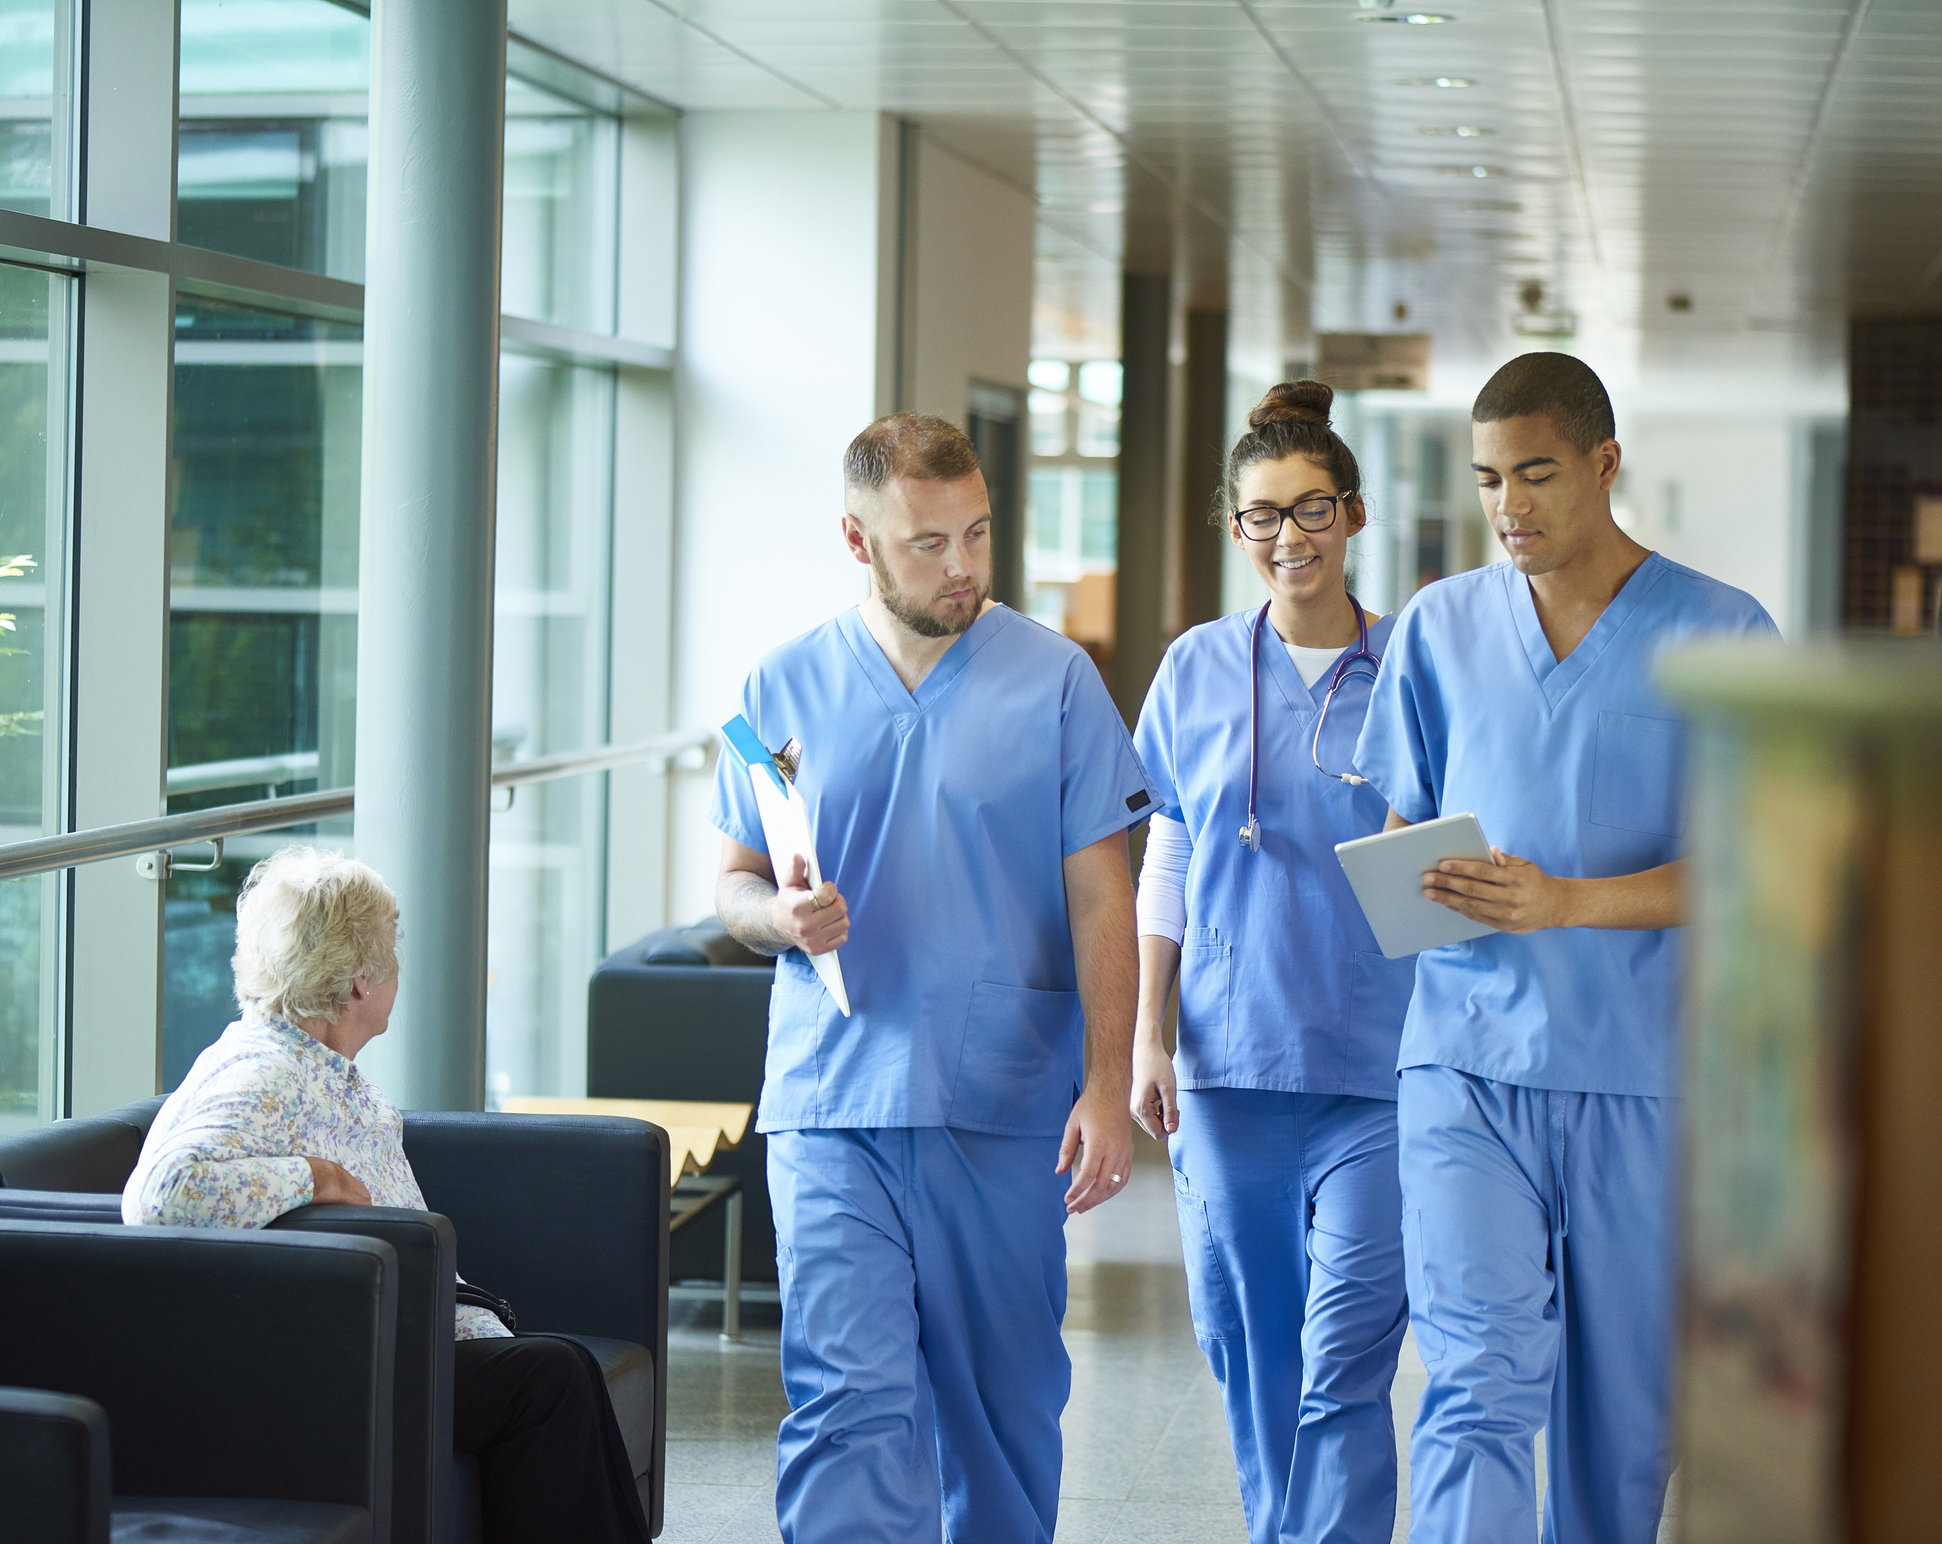 three junior doctors walking along a hospital corridor discussing case and wearing scrubs. A patient or visitor is sitting in the corridor as they walk past.